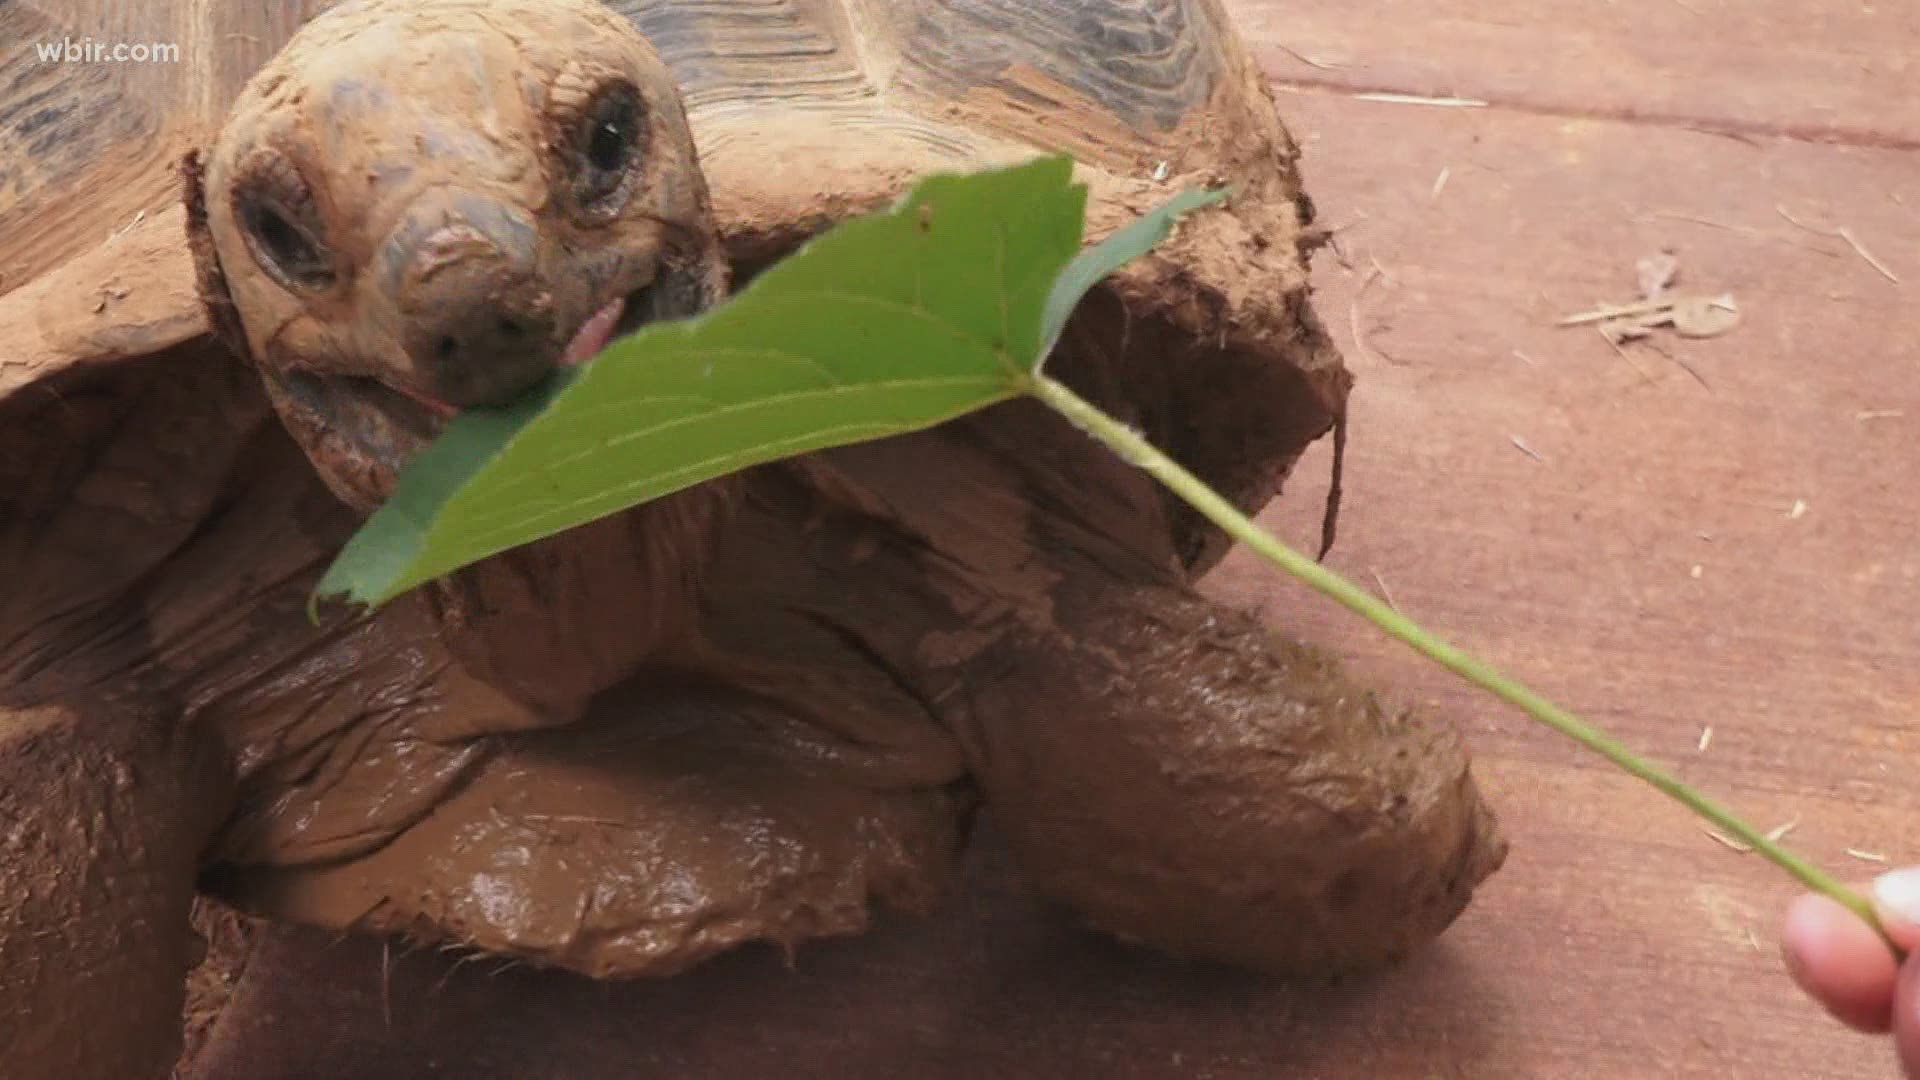 Want to feed a giraffe? Done. Scrub a giant tortoise? You got it. Hold a bird? Can do.